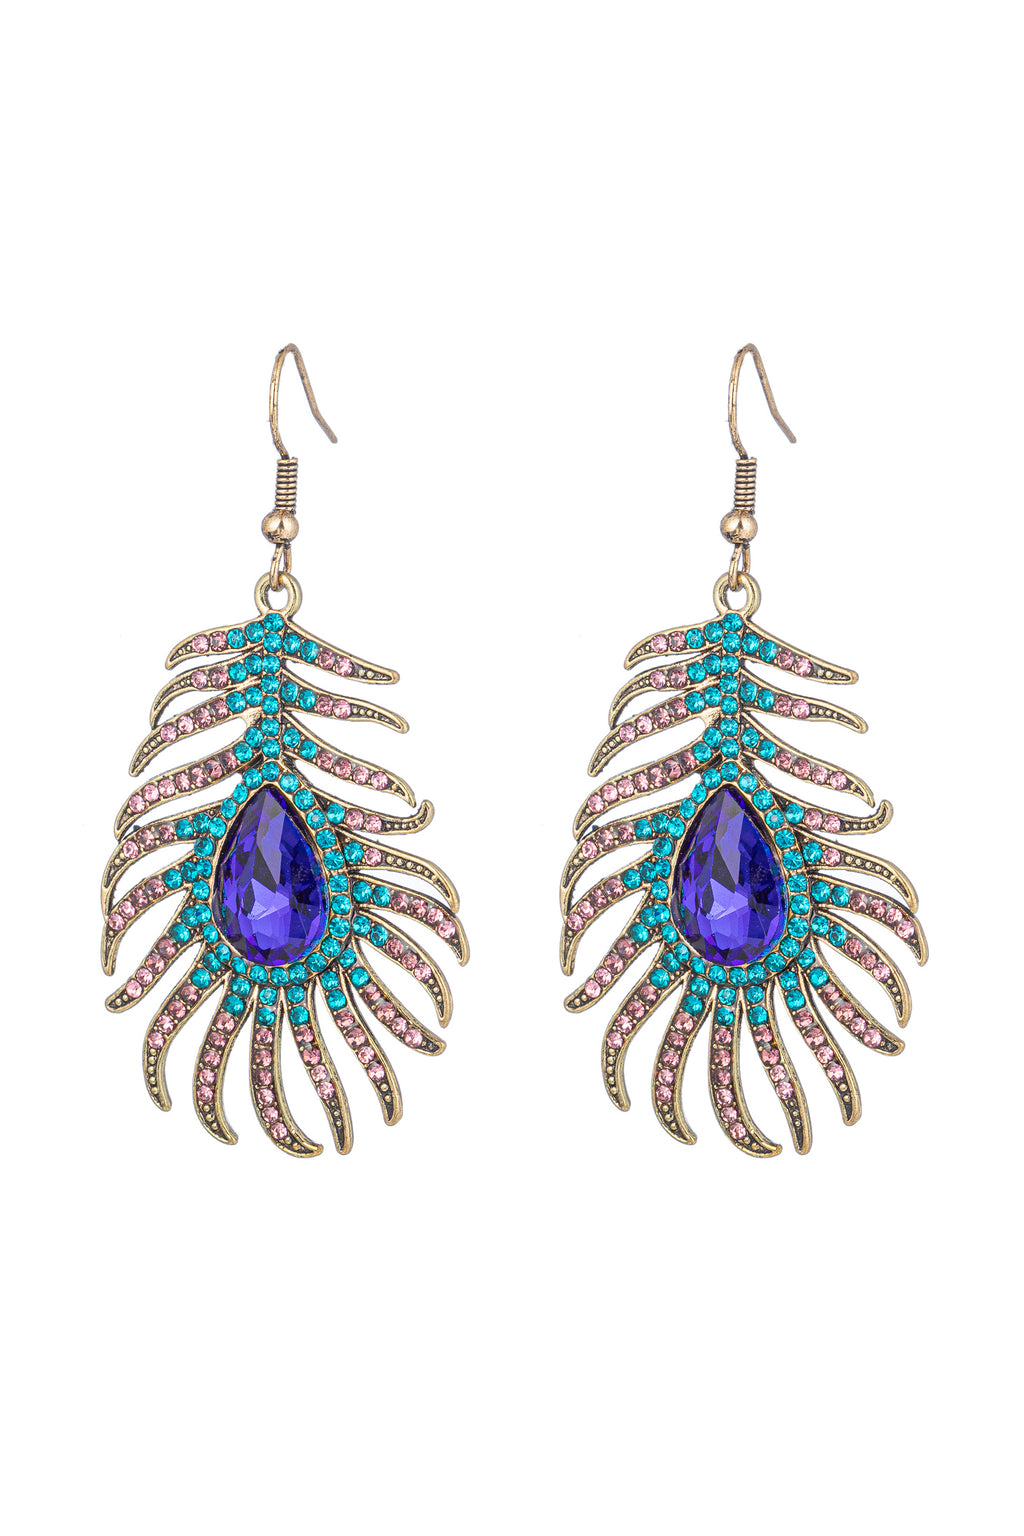 Gold tone alloy multicolored glass crystal statement earrings.